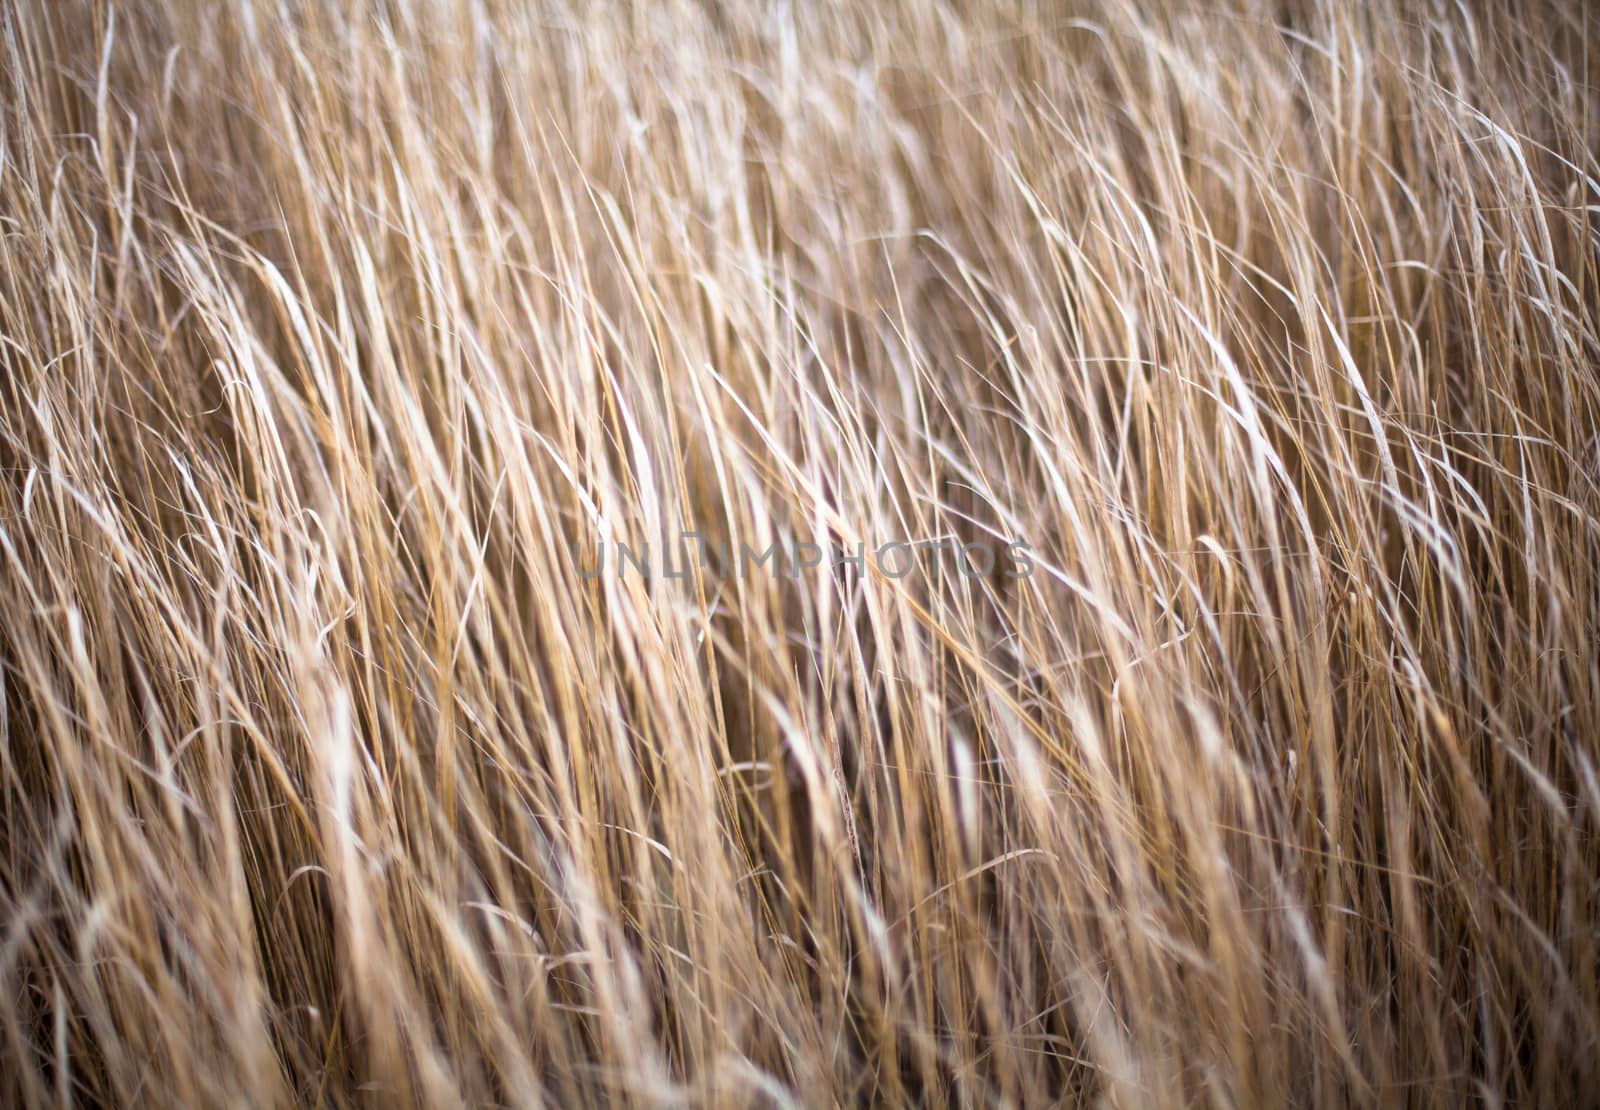 Unmown dry grass in the field. Close up.